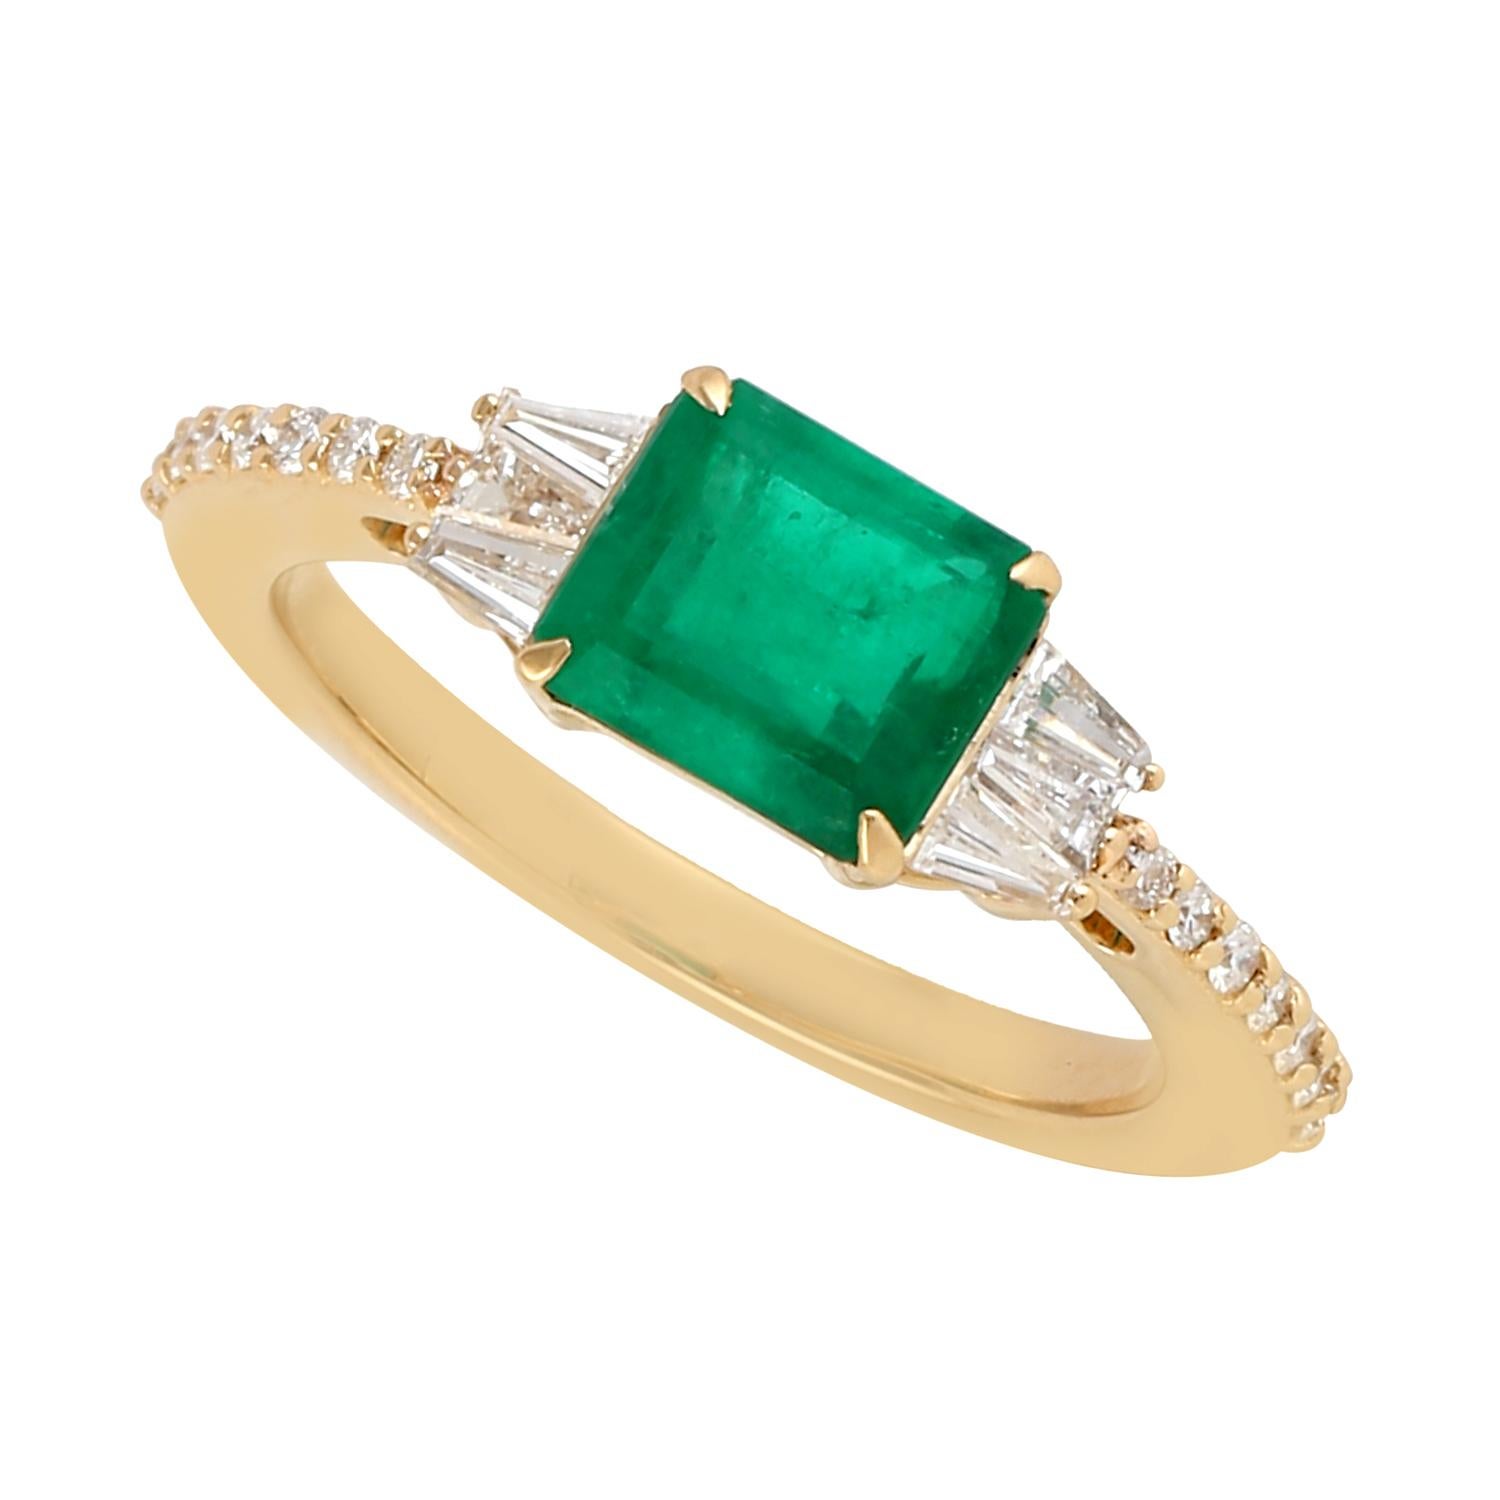 Mixed Cut Emerald Ring with Pave Diamonds Made in 18k Yellow Gold For Sale